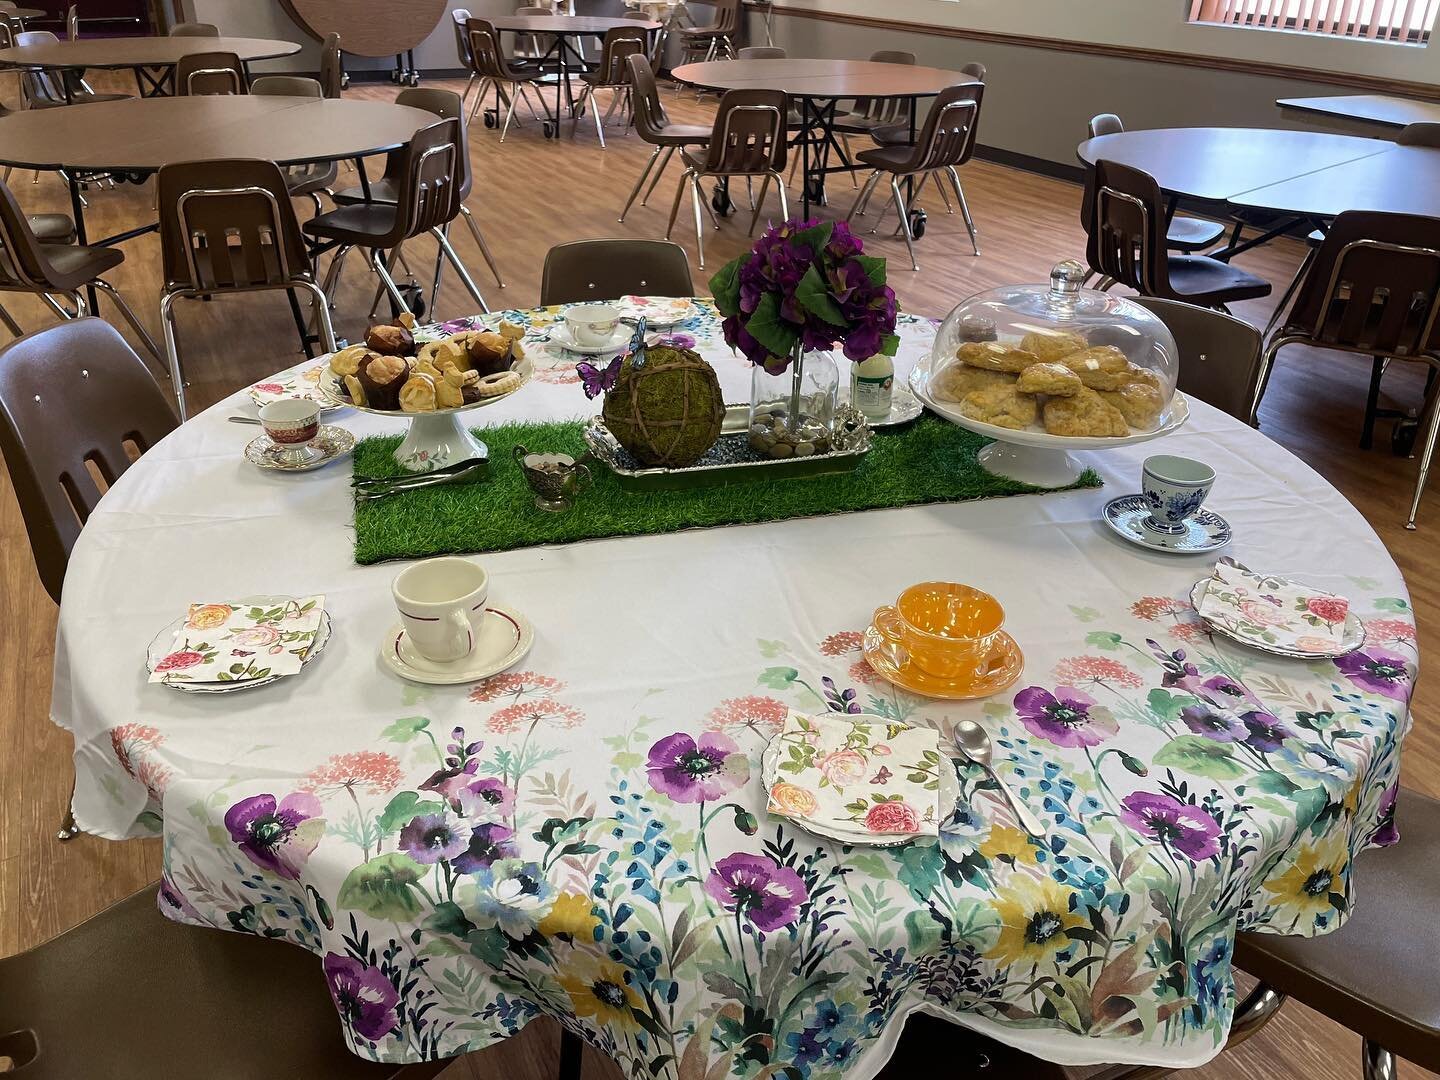 I didn&rsquo;t get any action shots but I had a ton of fun setting up a tea party for Girl Scout Troop 08438 in Grand Island. We did a full 3 course afternoon tea and learned propped tea etiquette. I had a blast! 🥰☕️🫖 

#goldenbadgerbakeshop #girls